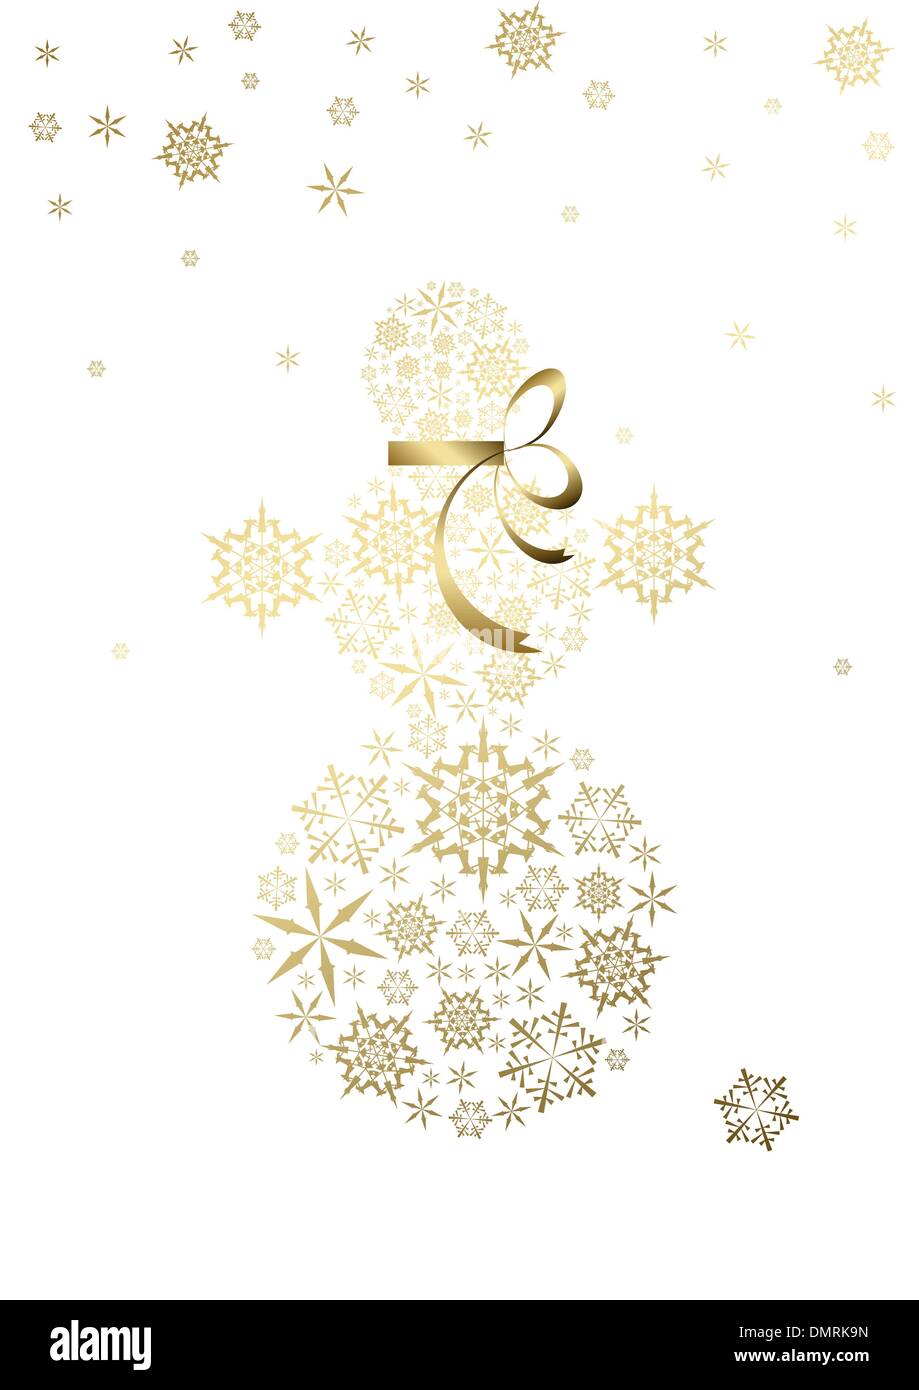 snowman made from golden snowflakes Stock Vector